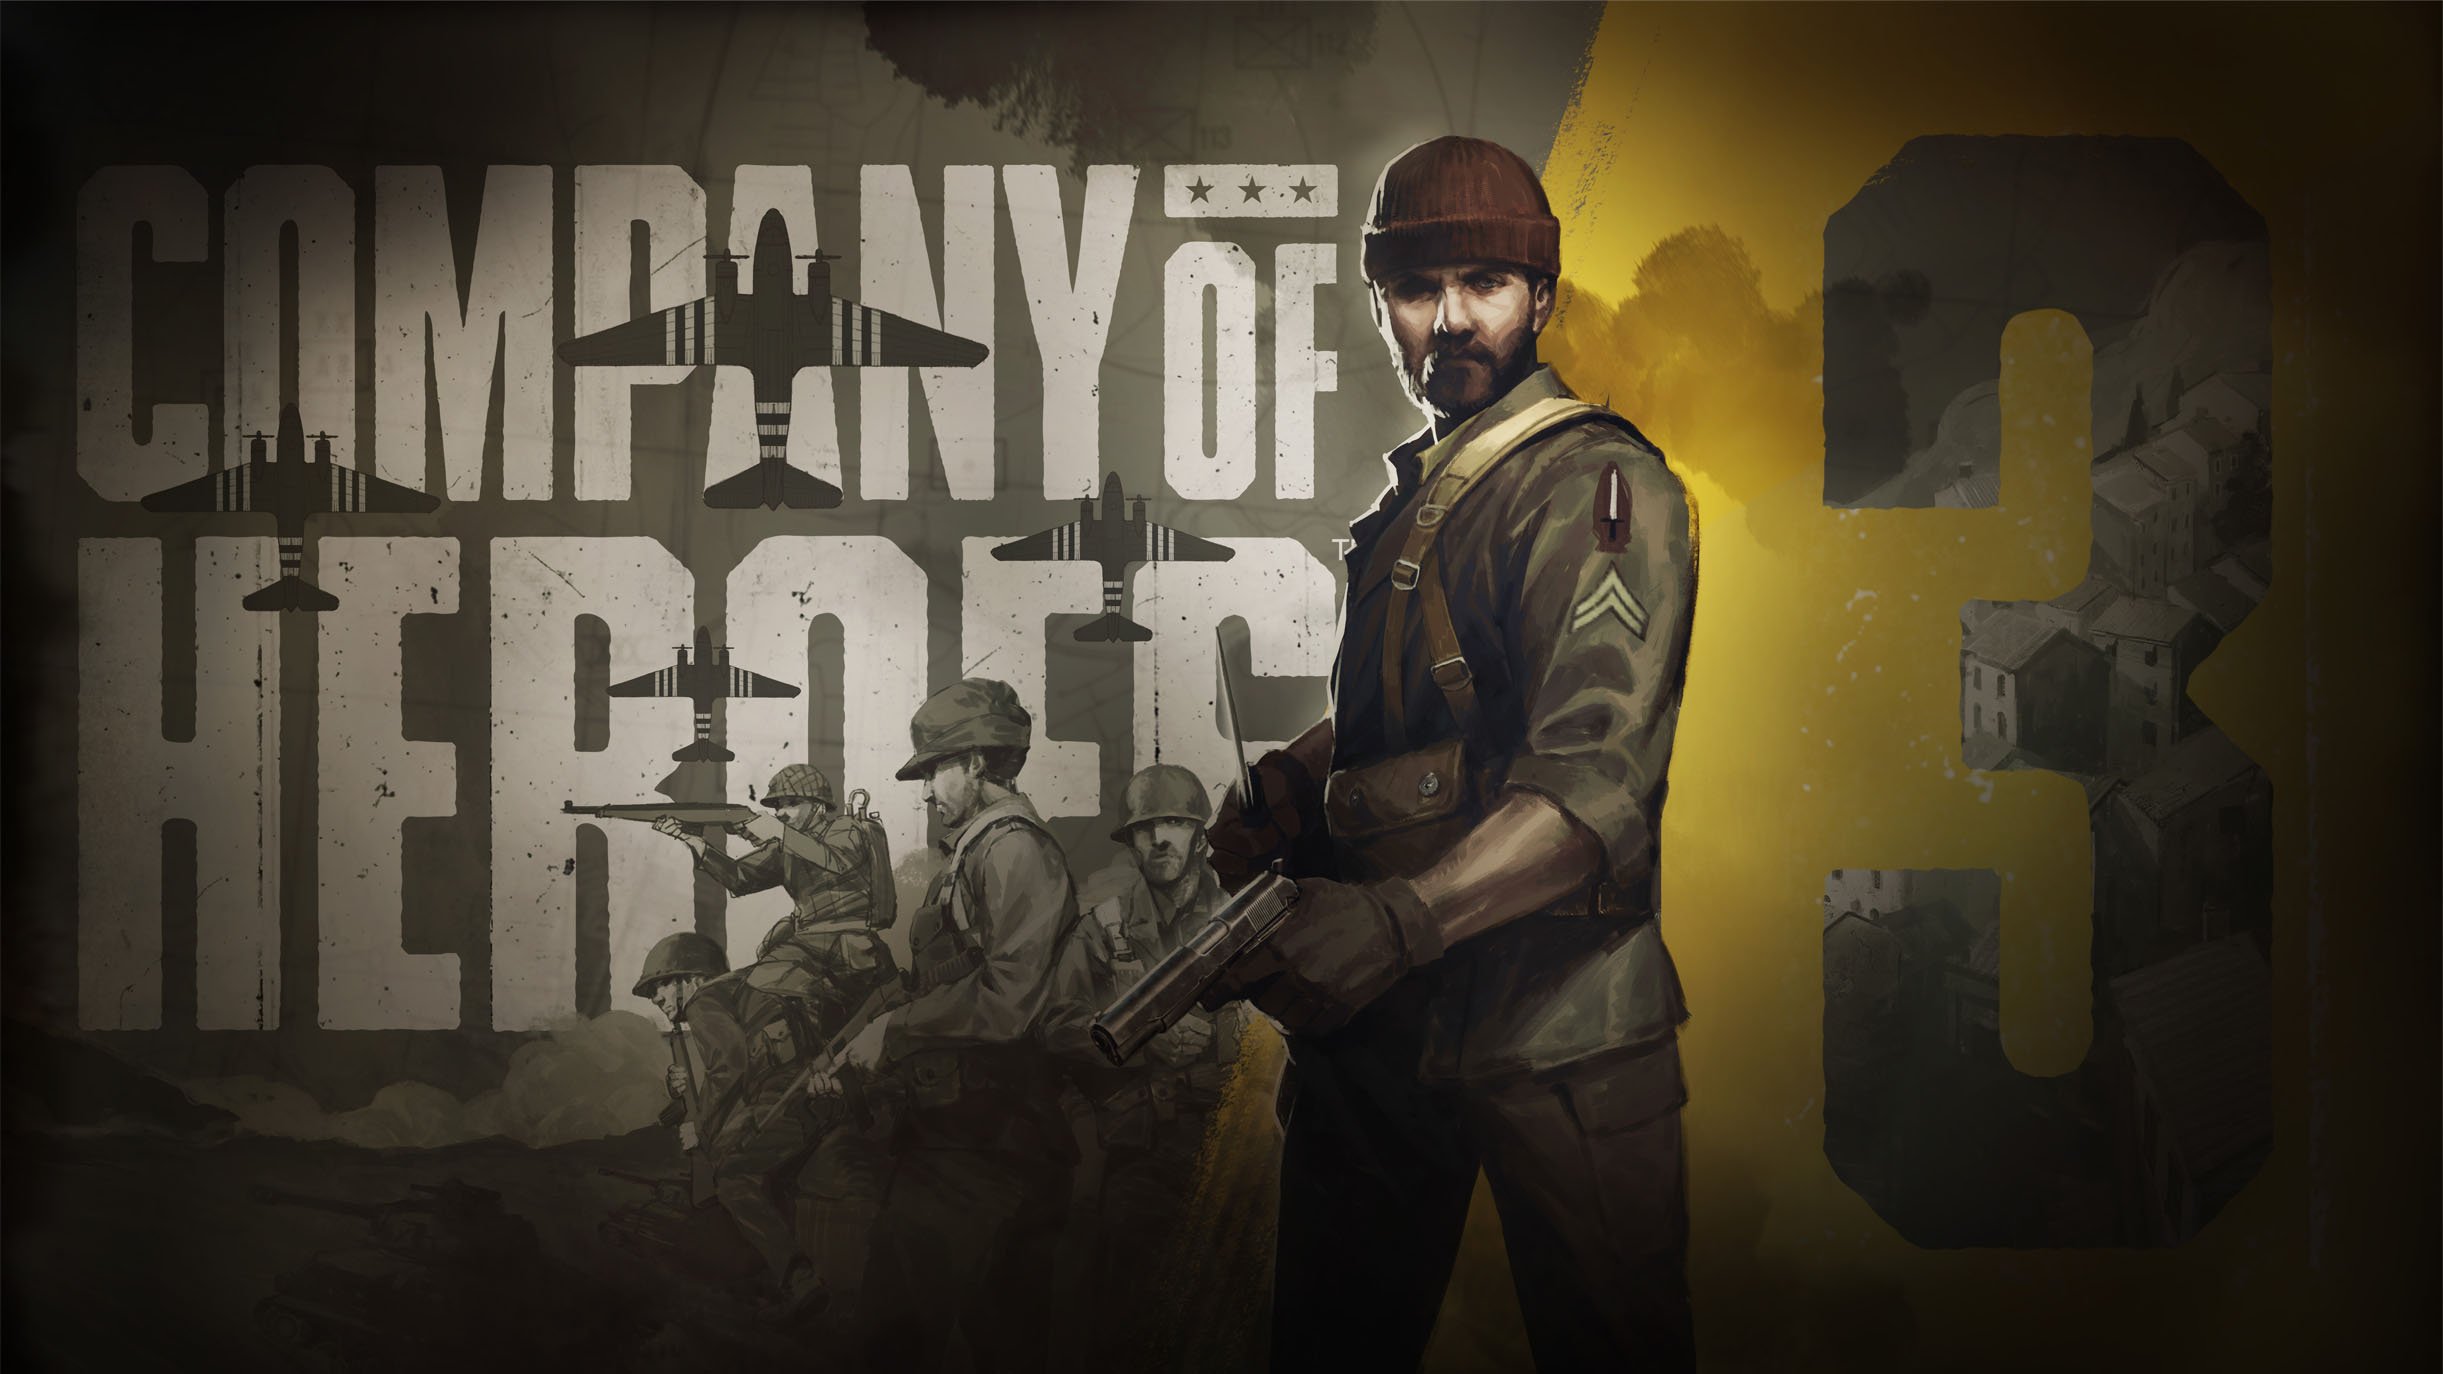 Company of Heroes 3 - Title Screen Concept Exploration